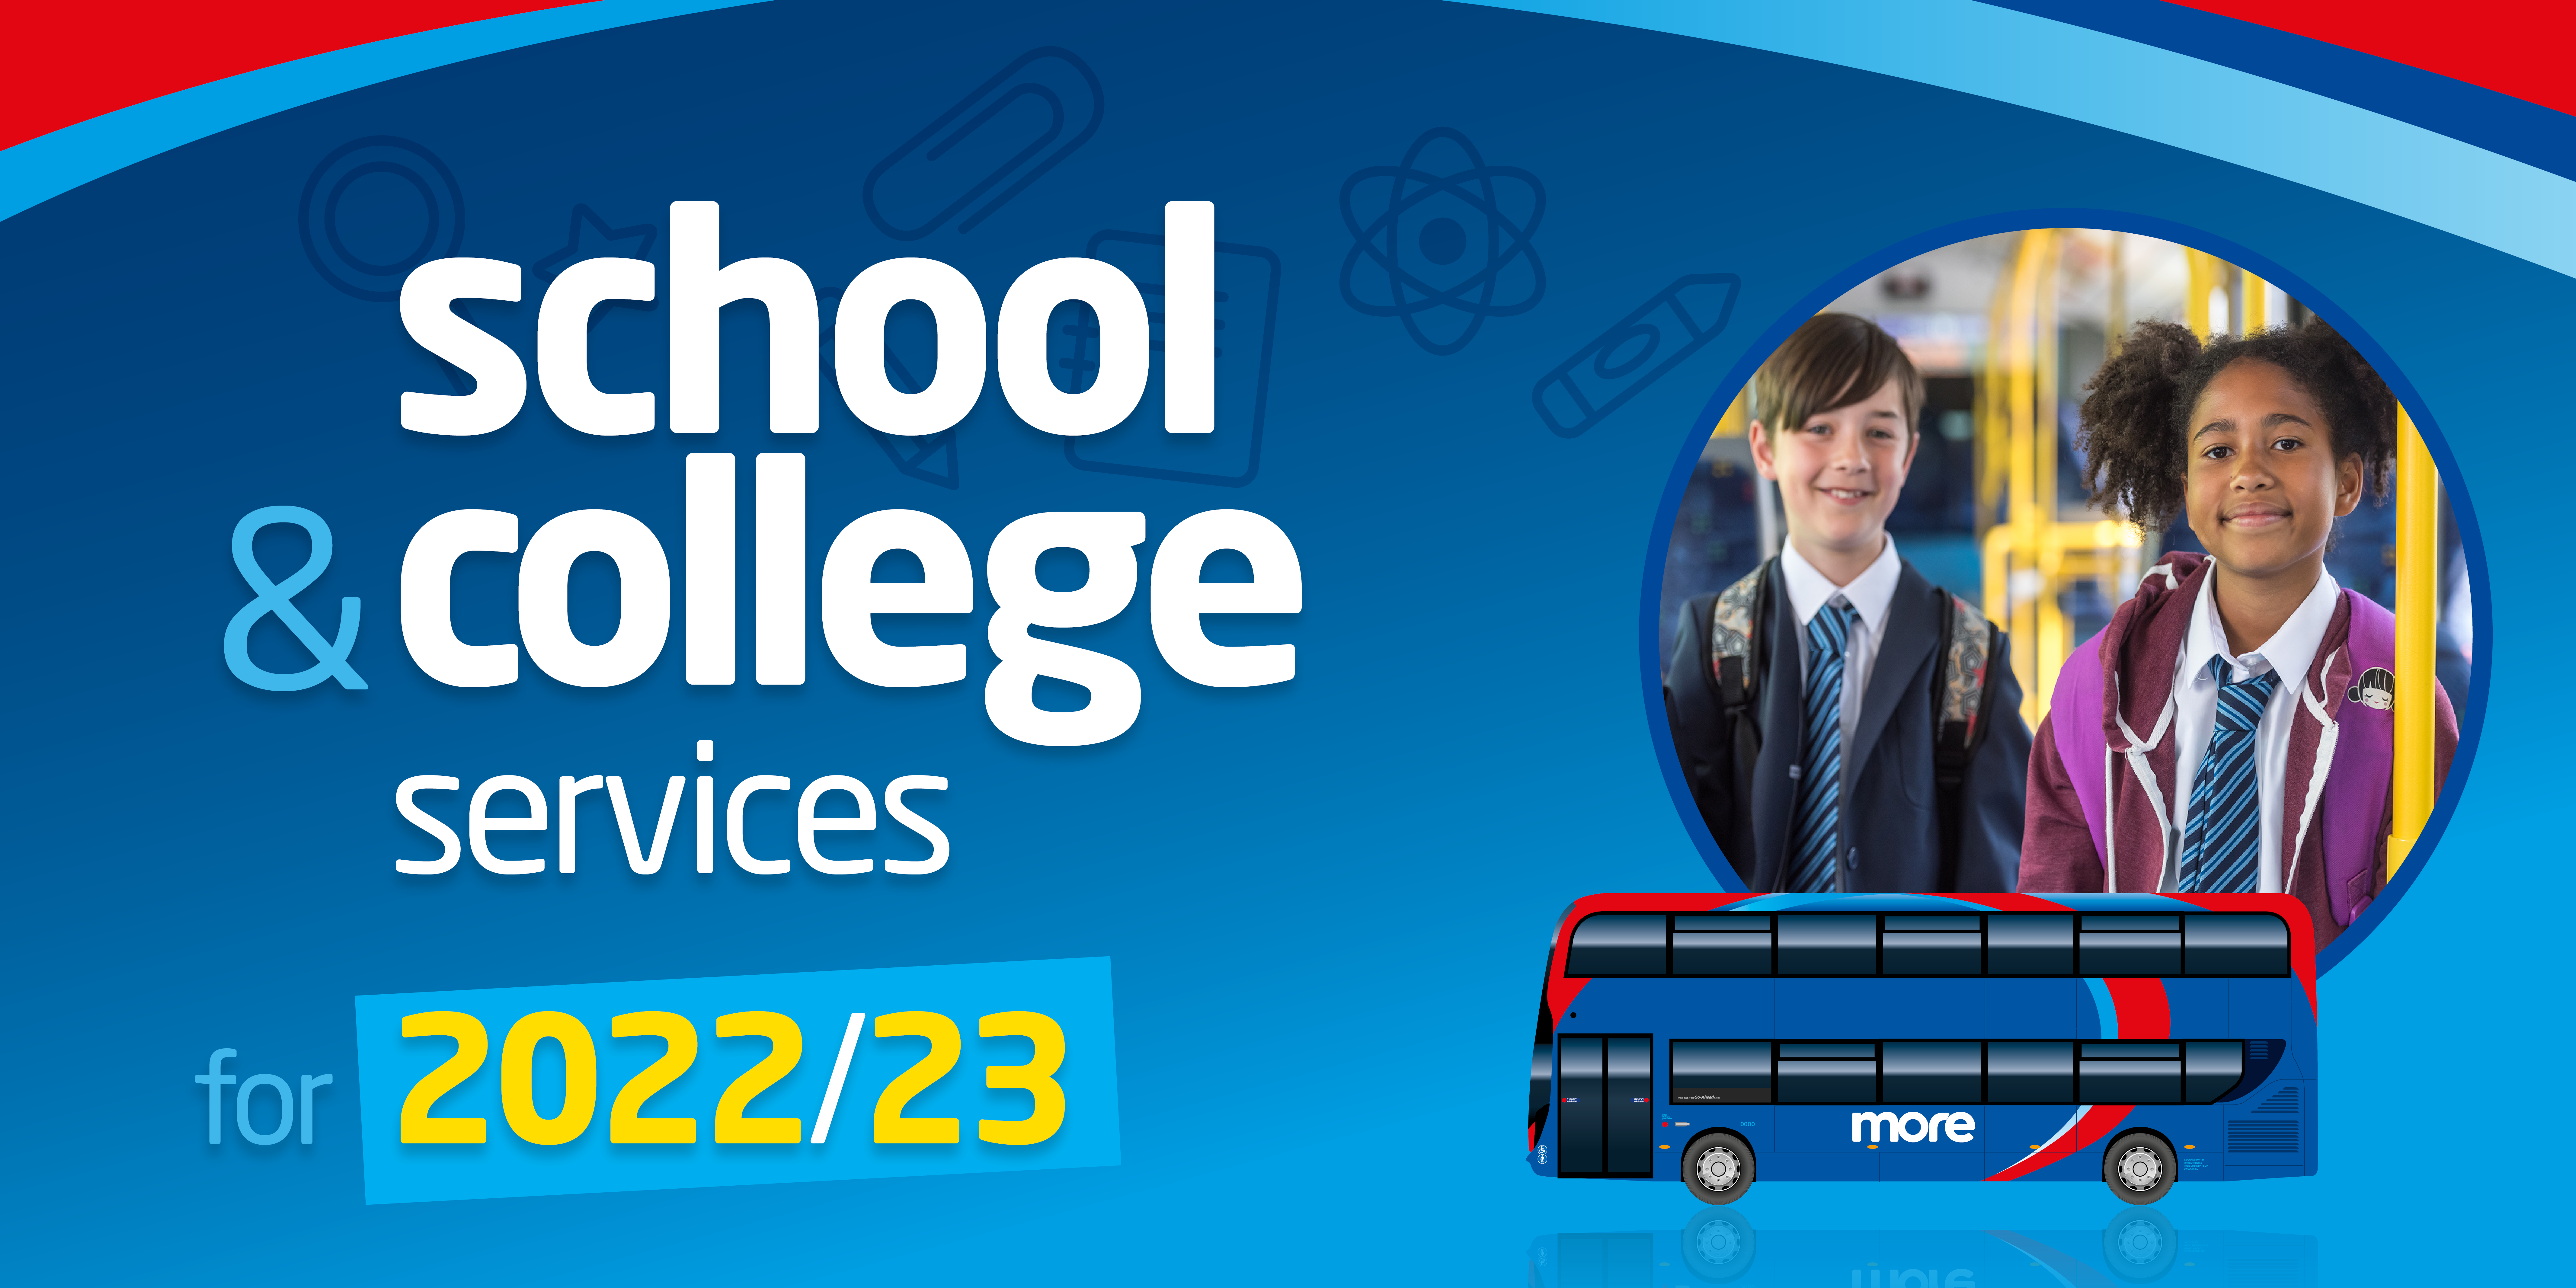 School and college service for 2022/23 advert for morebus